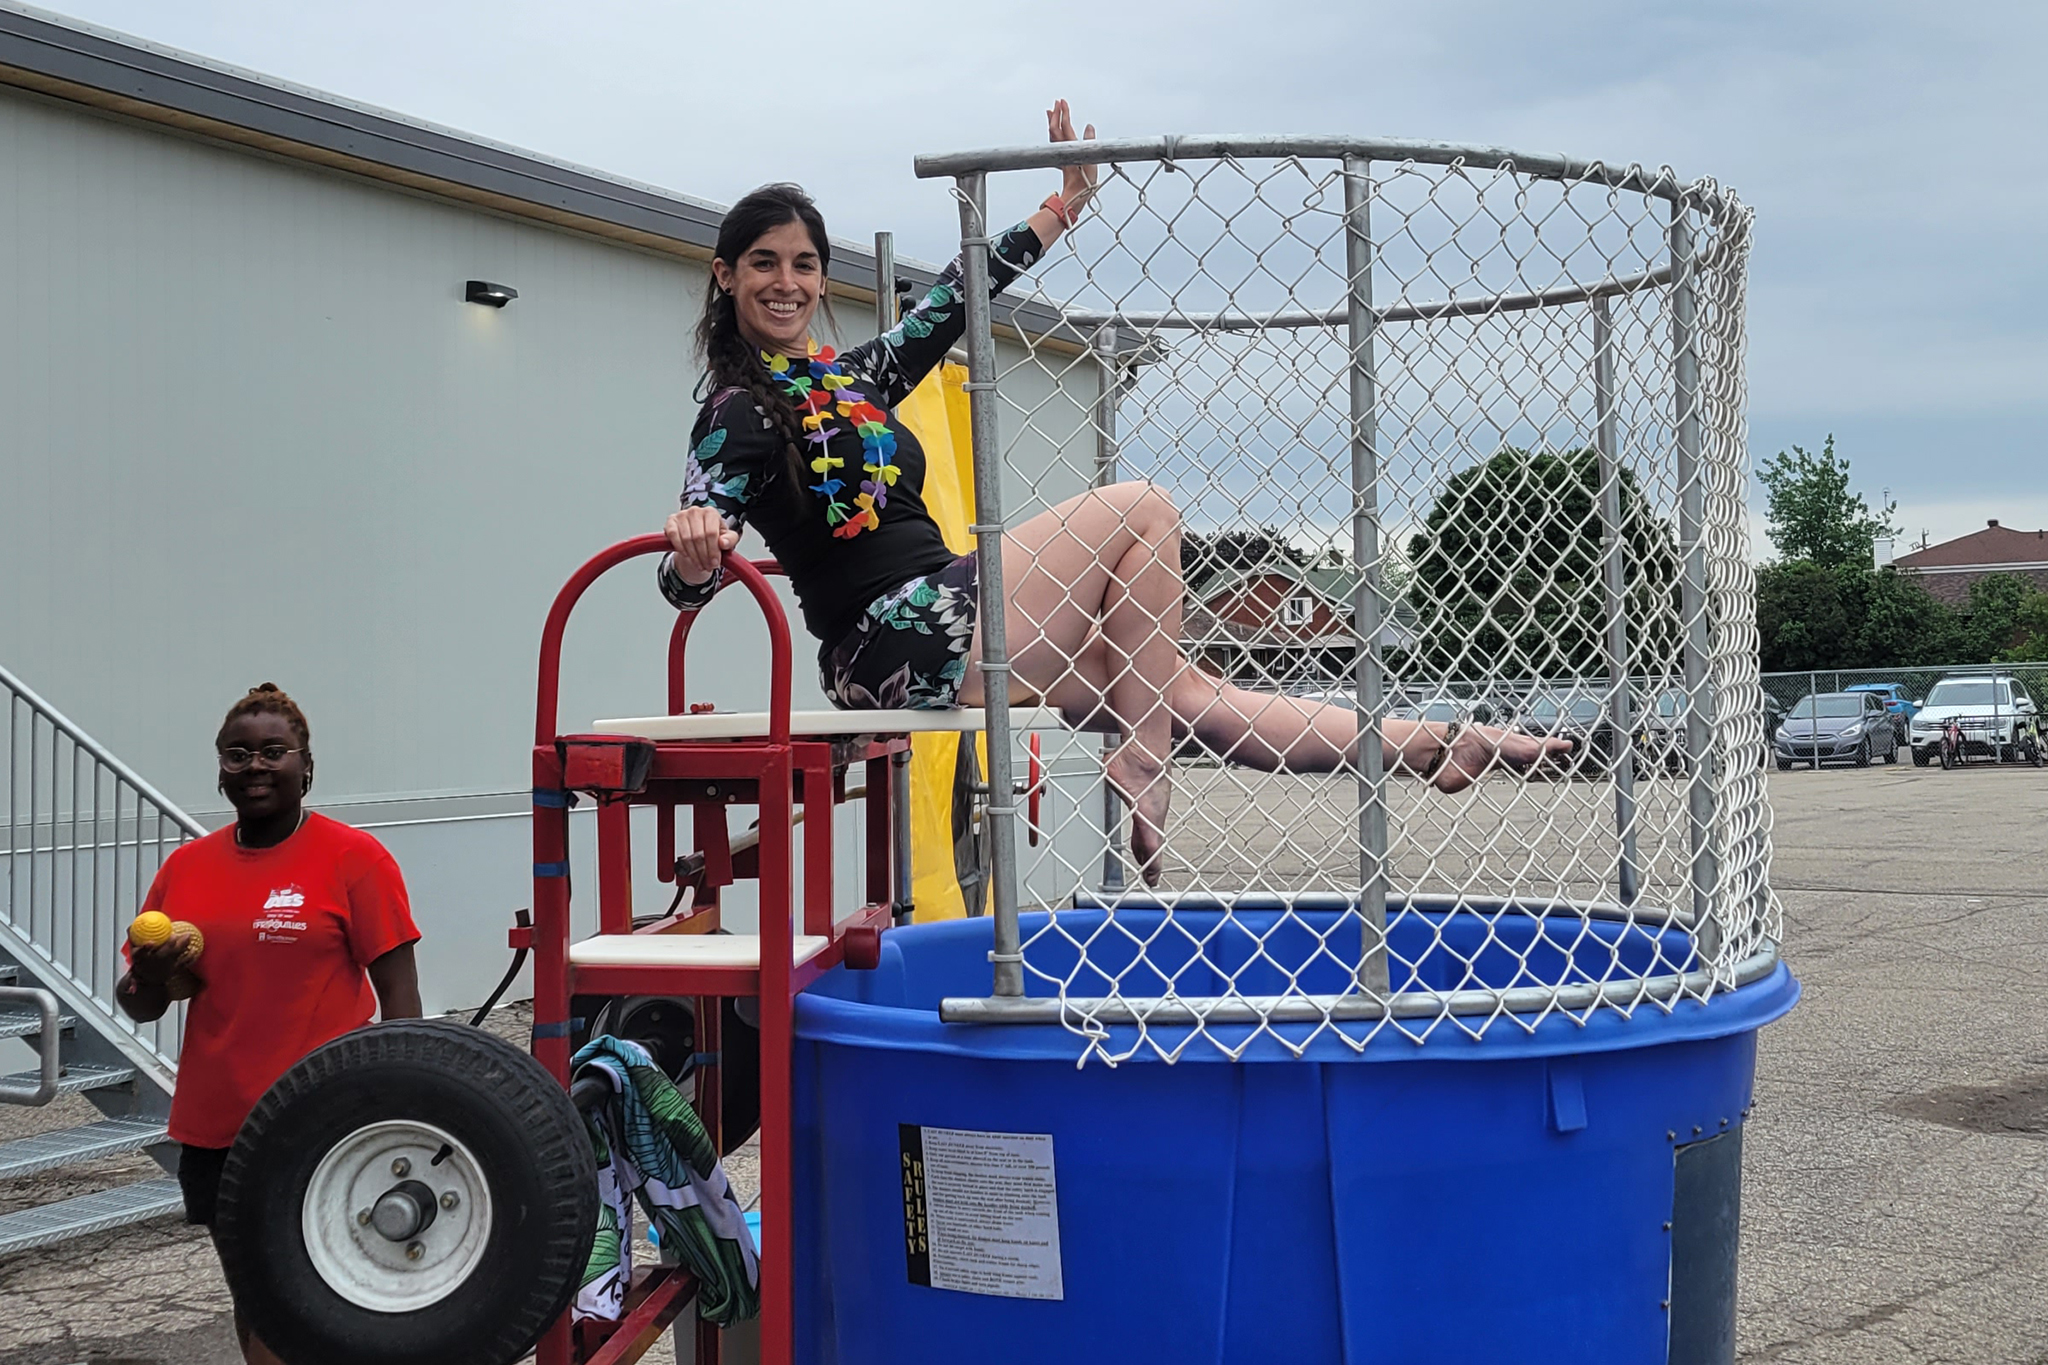 How much does it cost to rent a dunk tank